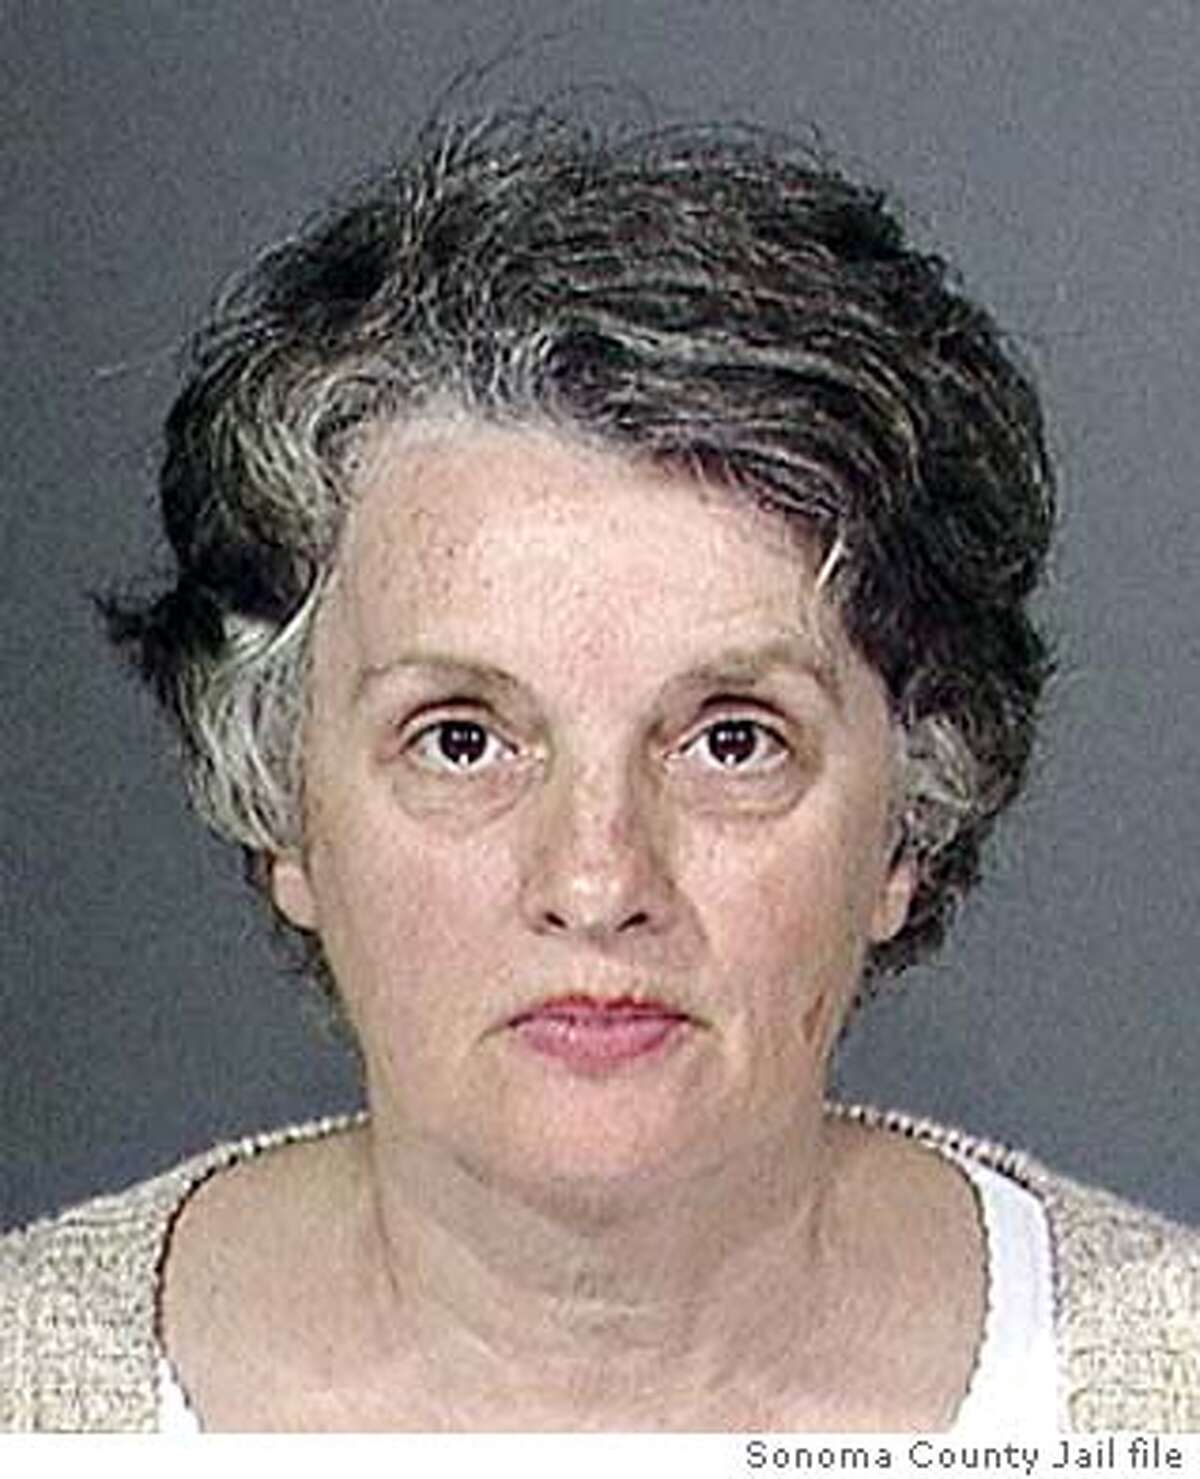 Petaluma authorities say Marilyn Barletta, shown in this undated booking mug, never lived in the two-story Petaluma Calif., residential district house where over 140 cats where found. Barletta, 61, posted bail two hours after she was arrested Tuesday on charges of felony cruelty to animals. (AP Photos/Sonoma County Jail) ALSO RAN 12/21/01, 03/20/02